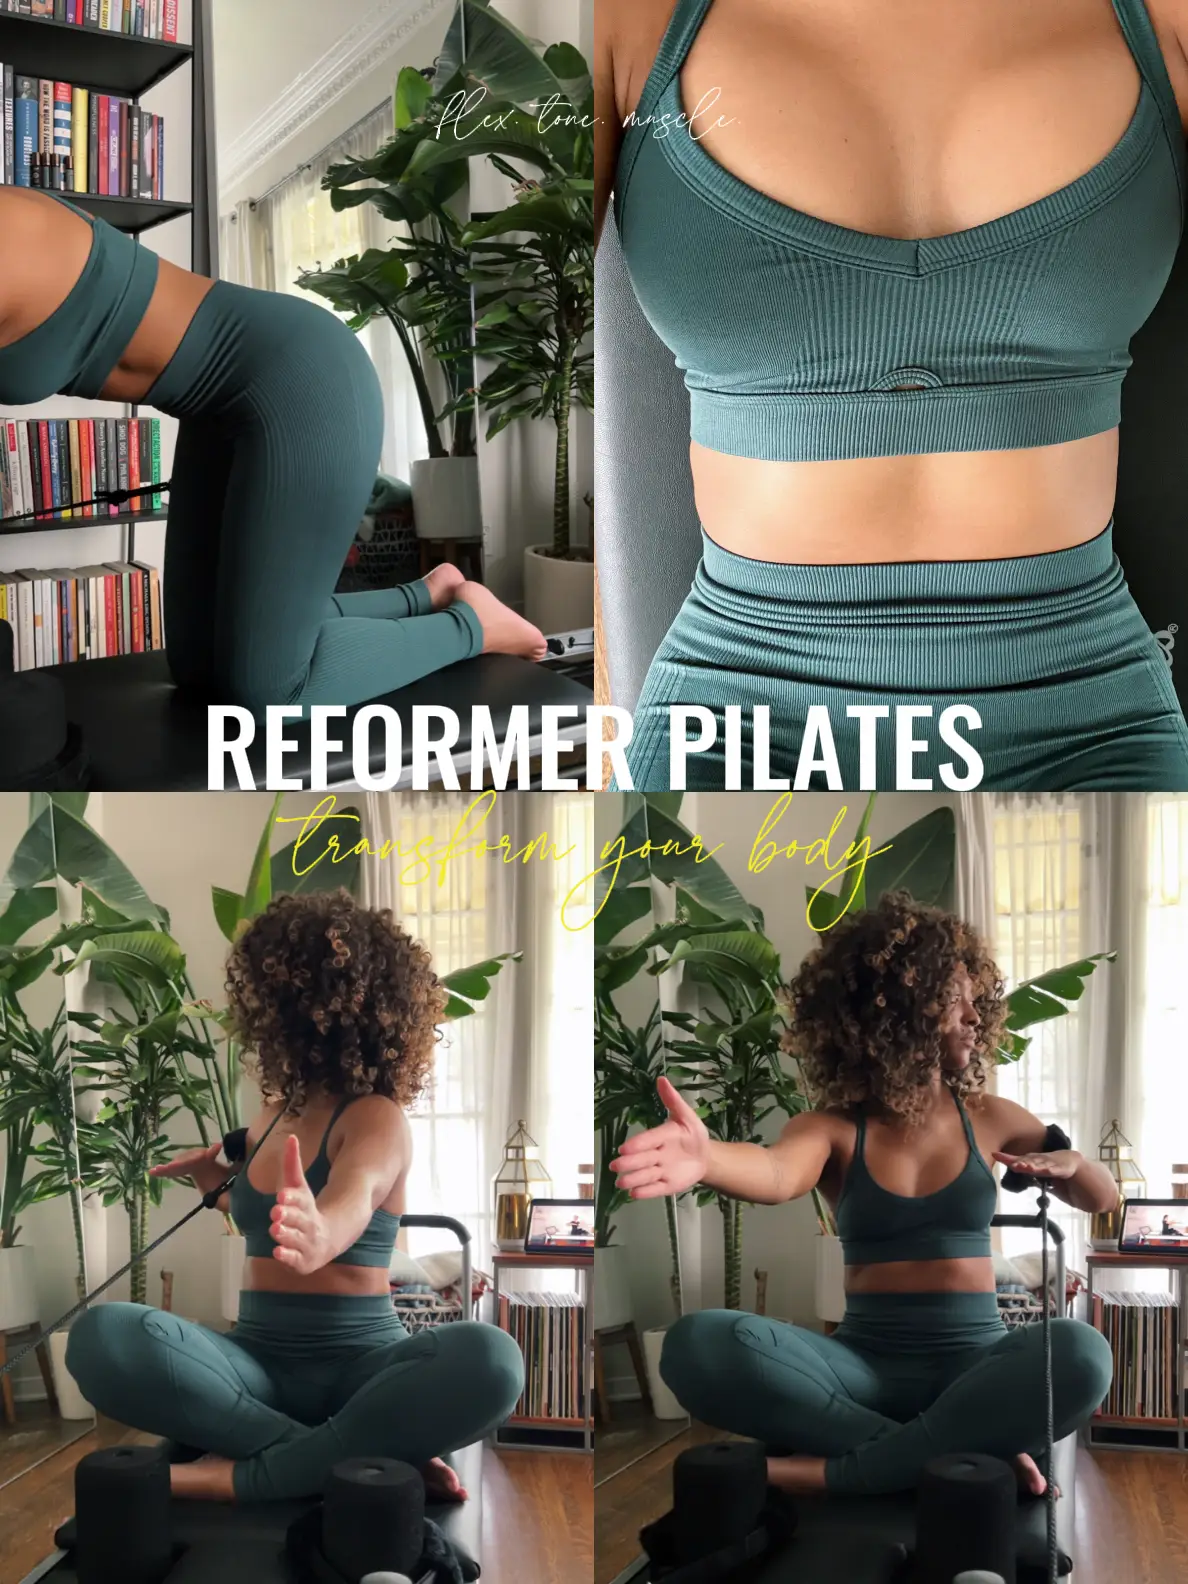 why I love reformer pilates 🧚‍♀️💫, Gallery posted by Jesslyn 🧸💫